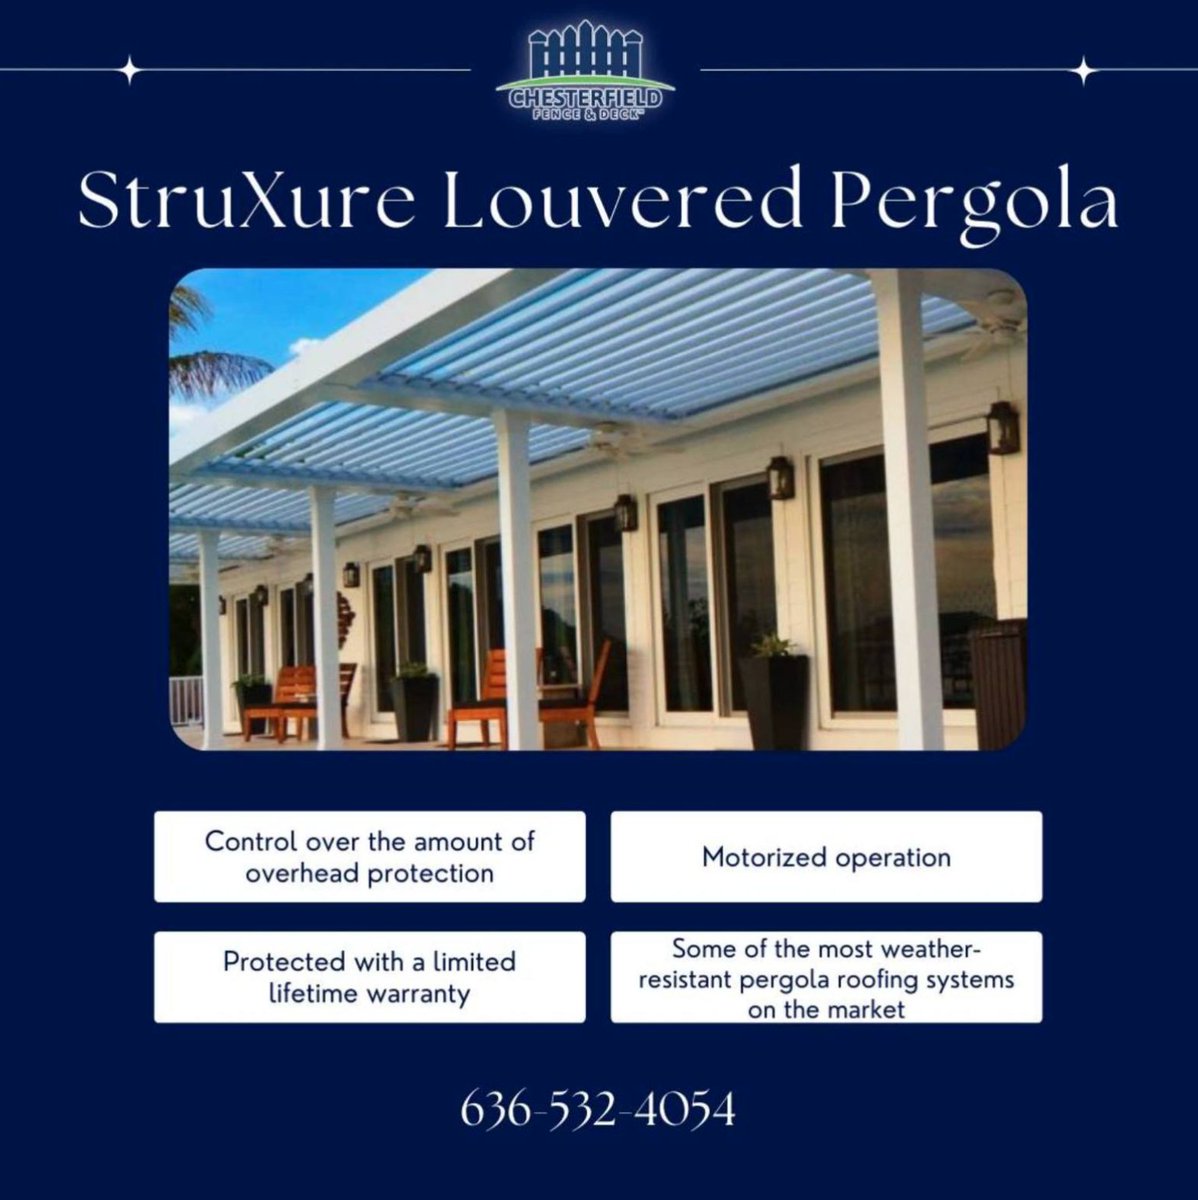 With a louvered pergola from StruXure™, you can easily adjust the operable roofing system to suit your needs, whether you want to let in the sunshine or create some shade!

Contact us today to learn more: chesterfieldfence.com/.../struxure-l…

#Pergola #OutdoorLiving #BackyardDesign